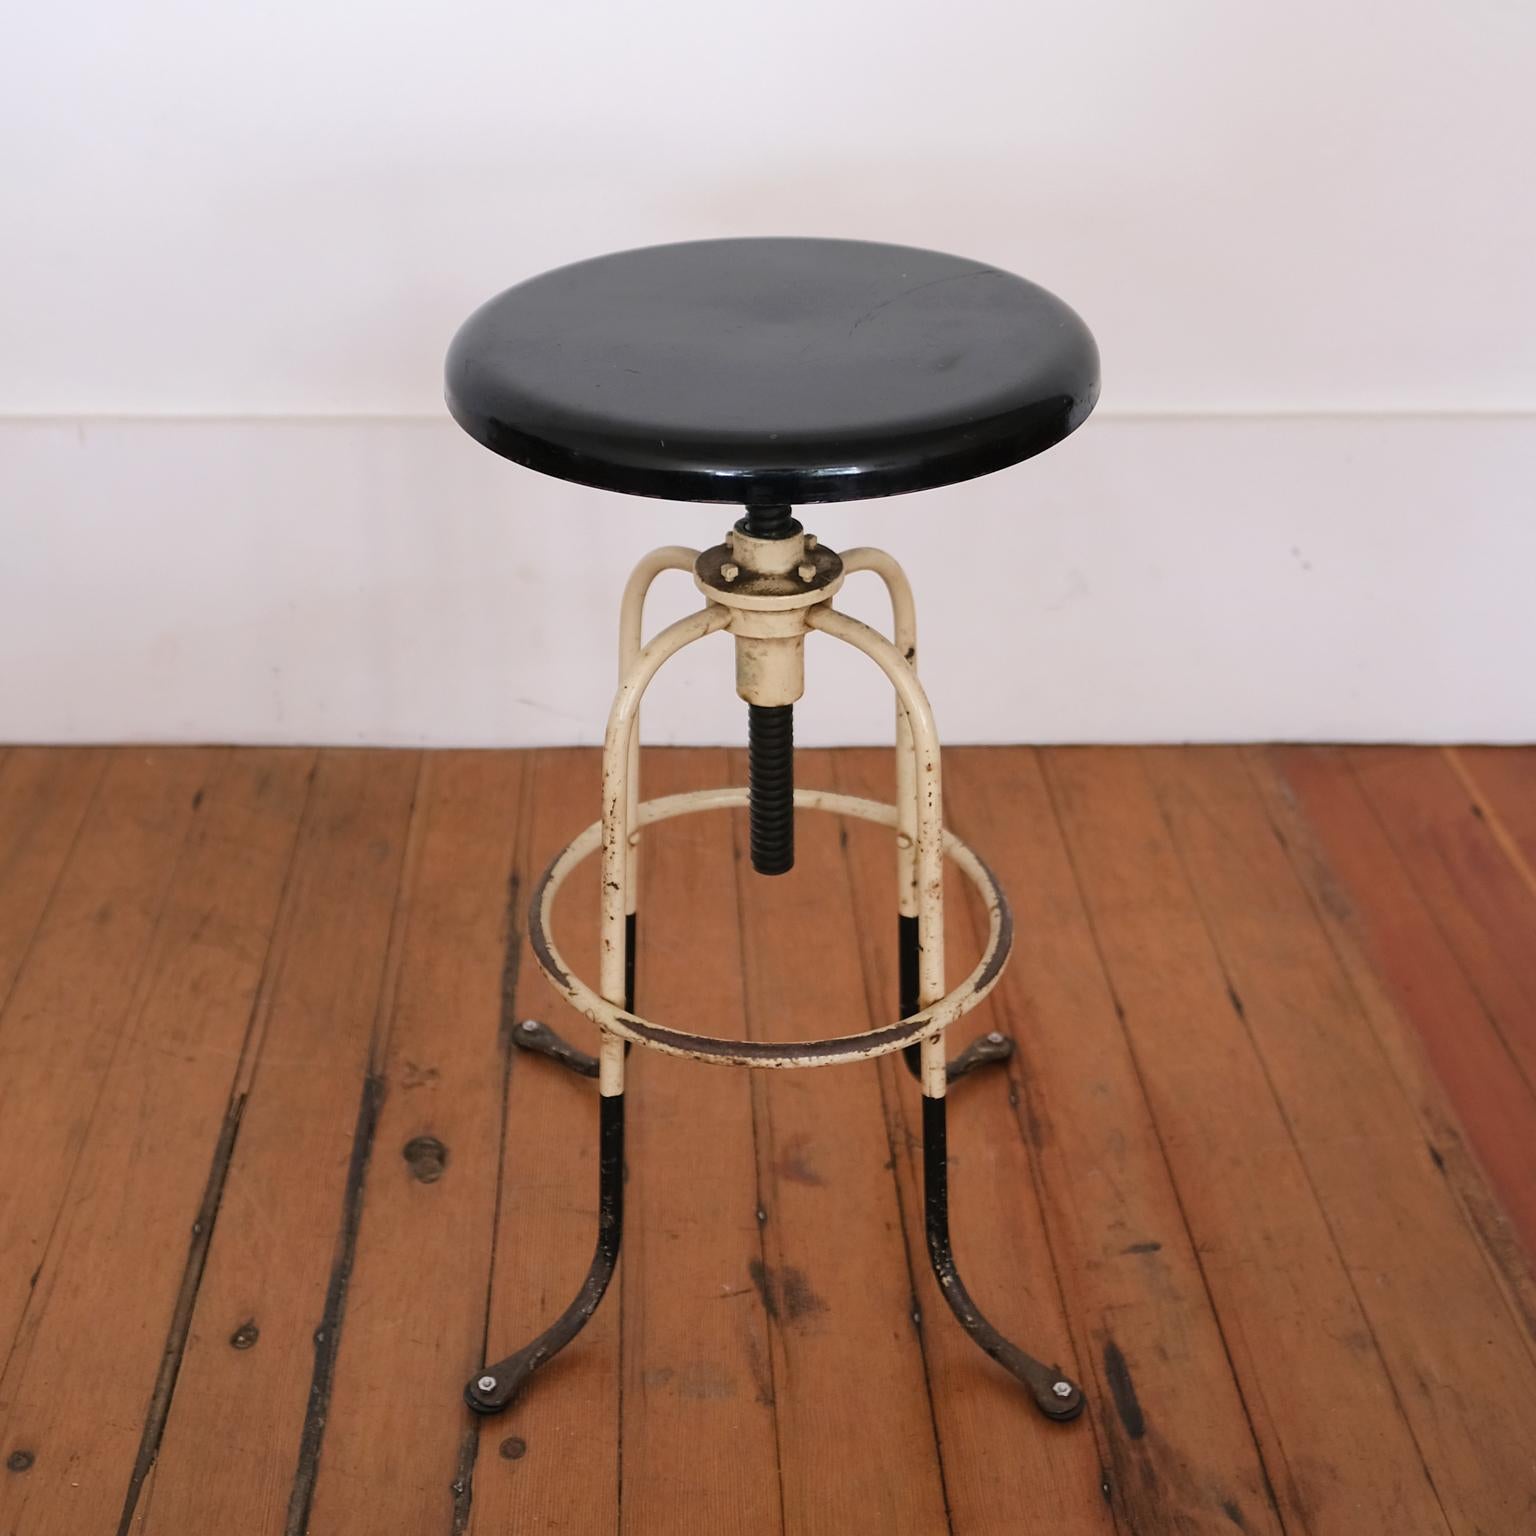 Early 1900s Adjustable Height Industrial Stool In Good Condition For Sale In San Diego, CA